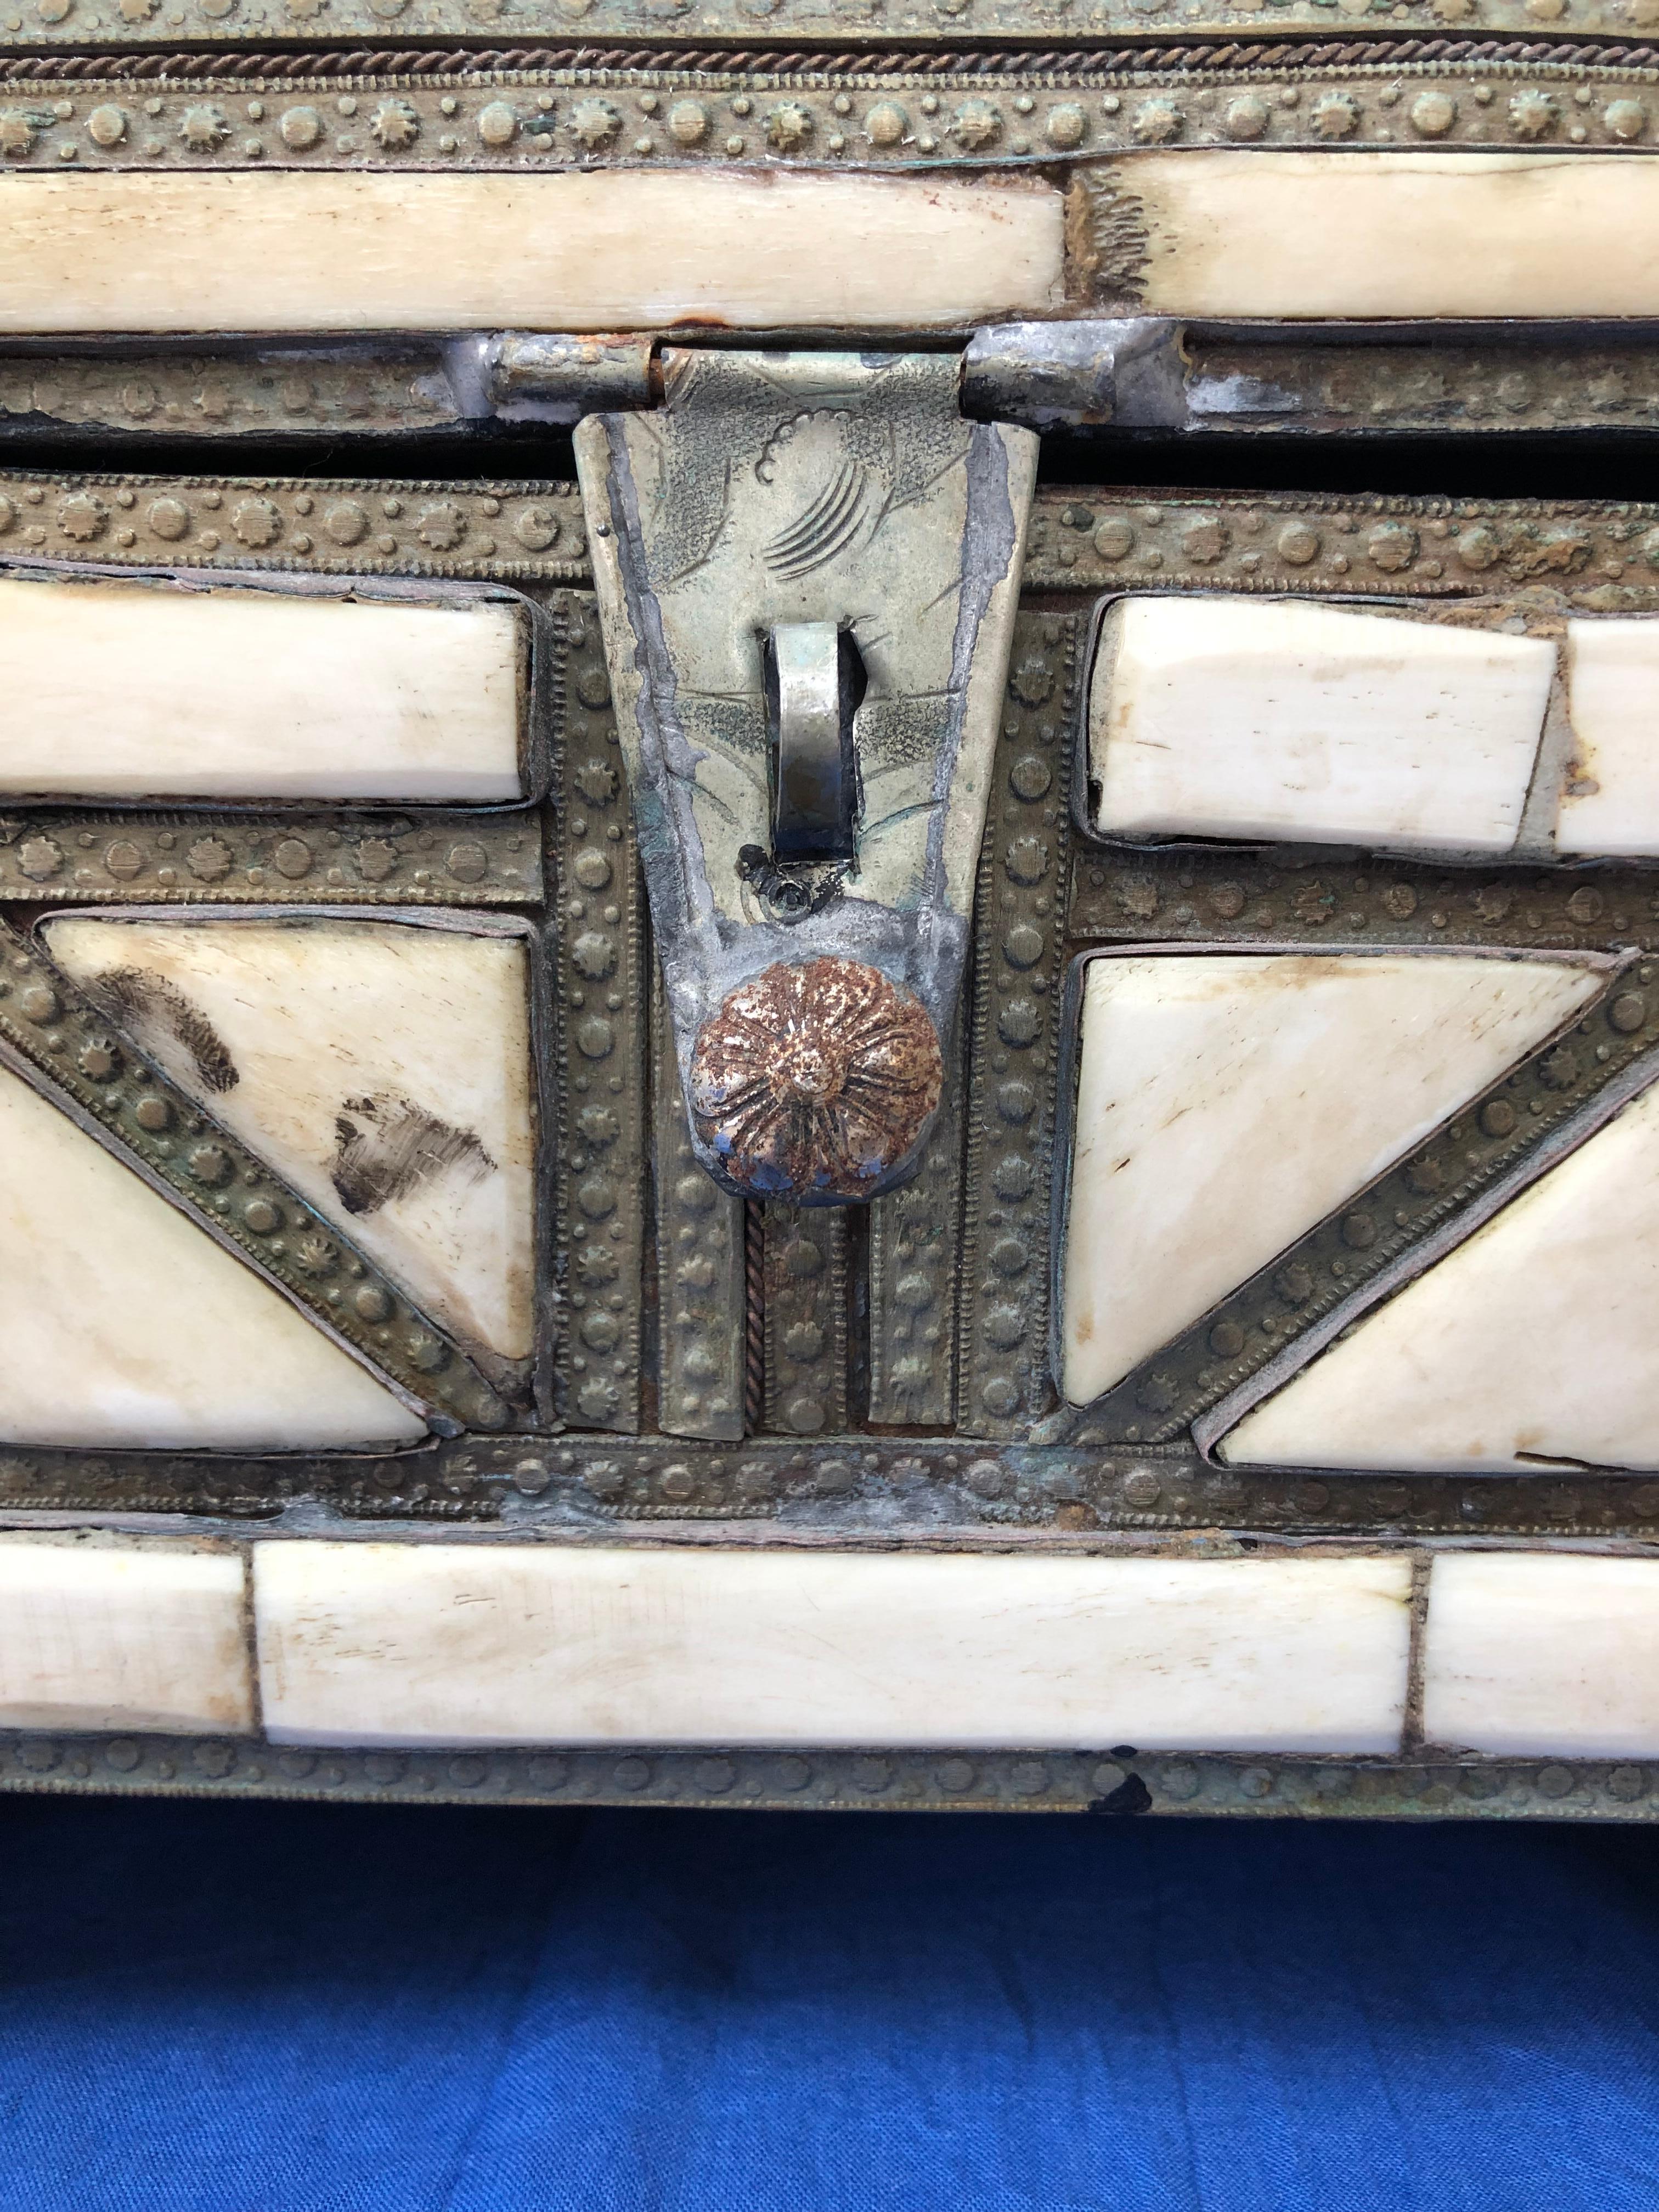 Mid 20th Century Small Moroccan Jewelry Chest - Repurposed Bone, Copper, Leather In Fair Condition For Sale In Vineyard Haven, MA